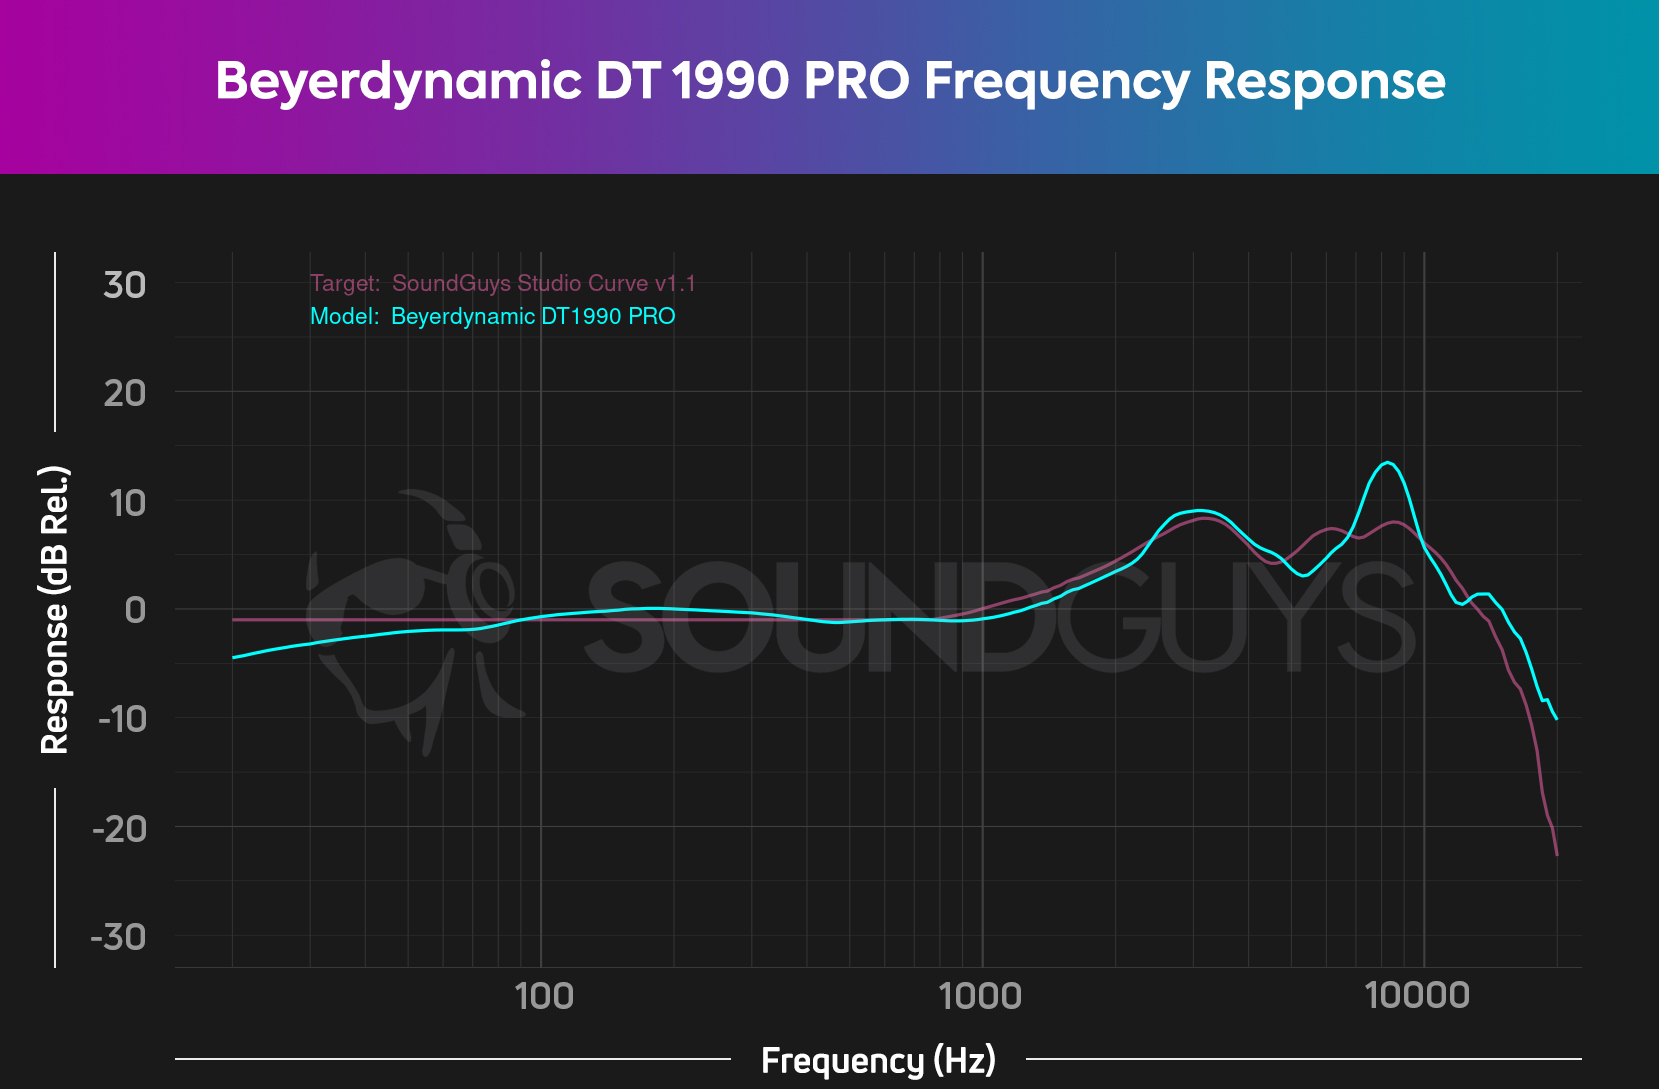 A frequency response chart for the Beyerdynamic DT 1990 PRO compared to the SoundGuys Studio Curve, showing the headset has a great output for studio work.